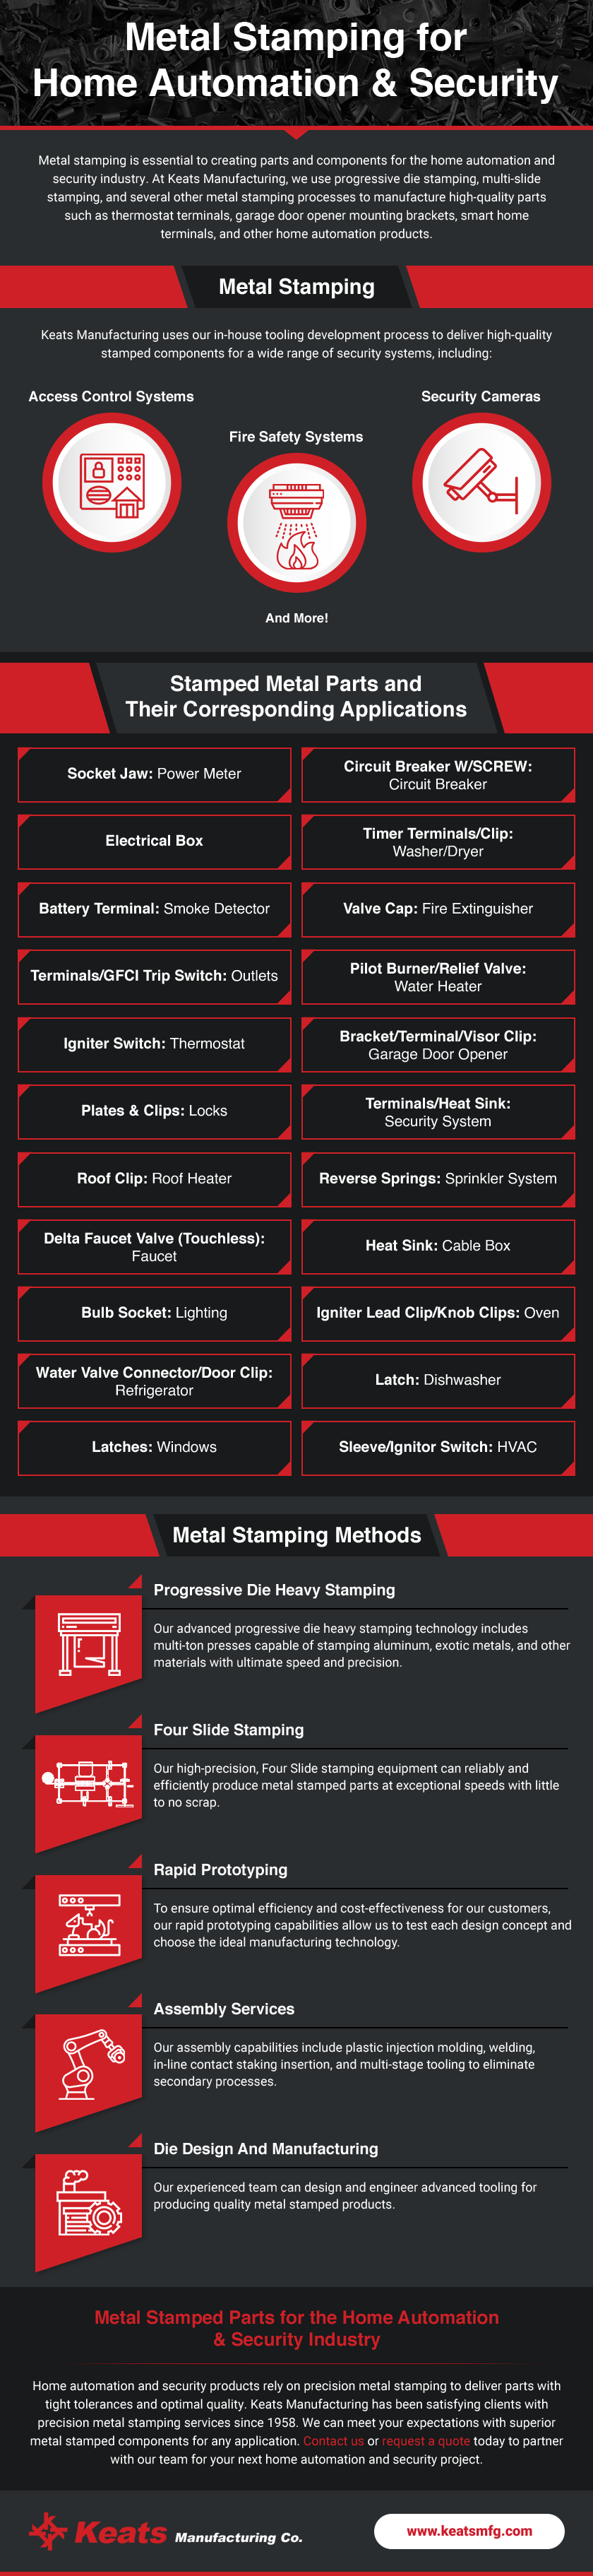 Metal Stamping for Home Automation Security